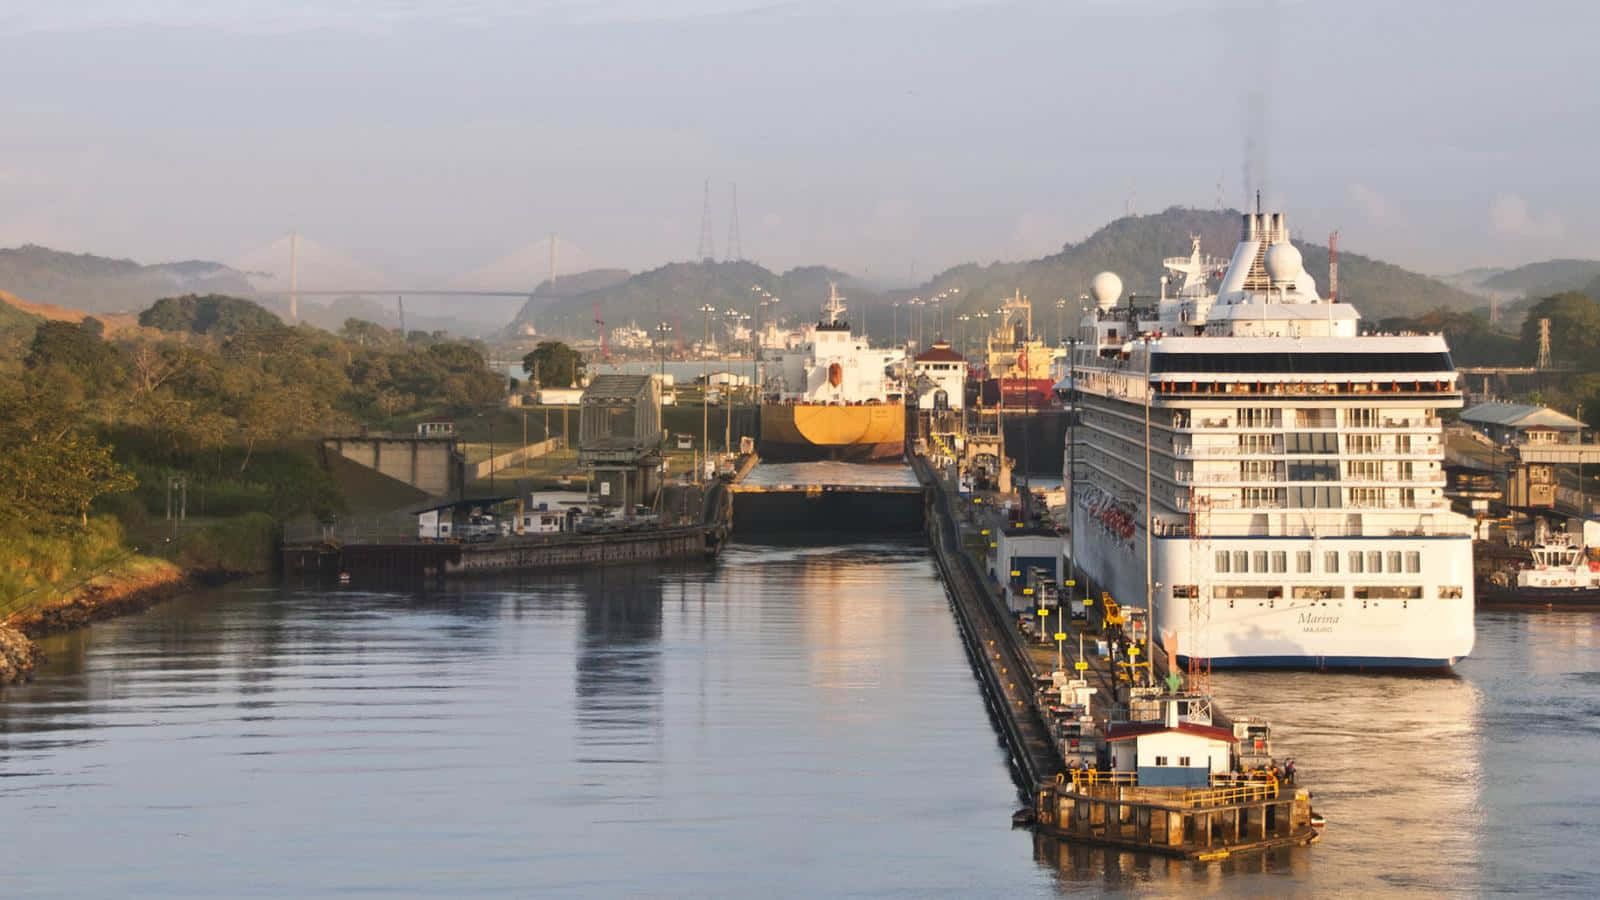 The Panama Canal With White Cruise Ship Wallpaper